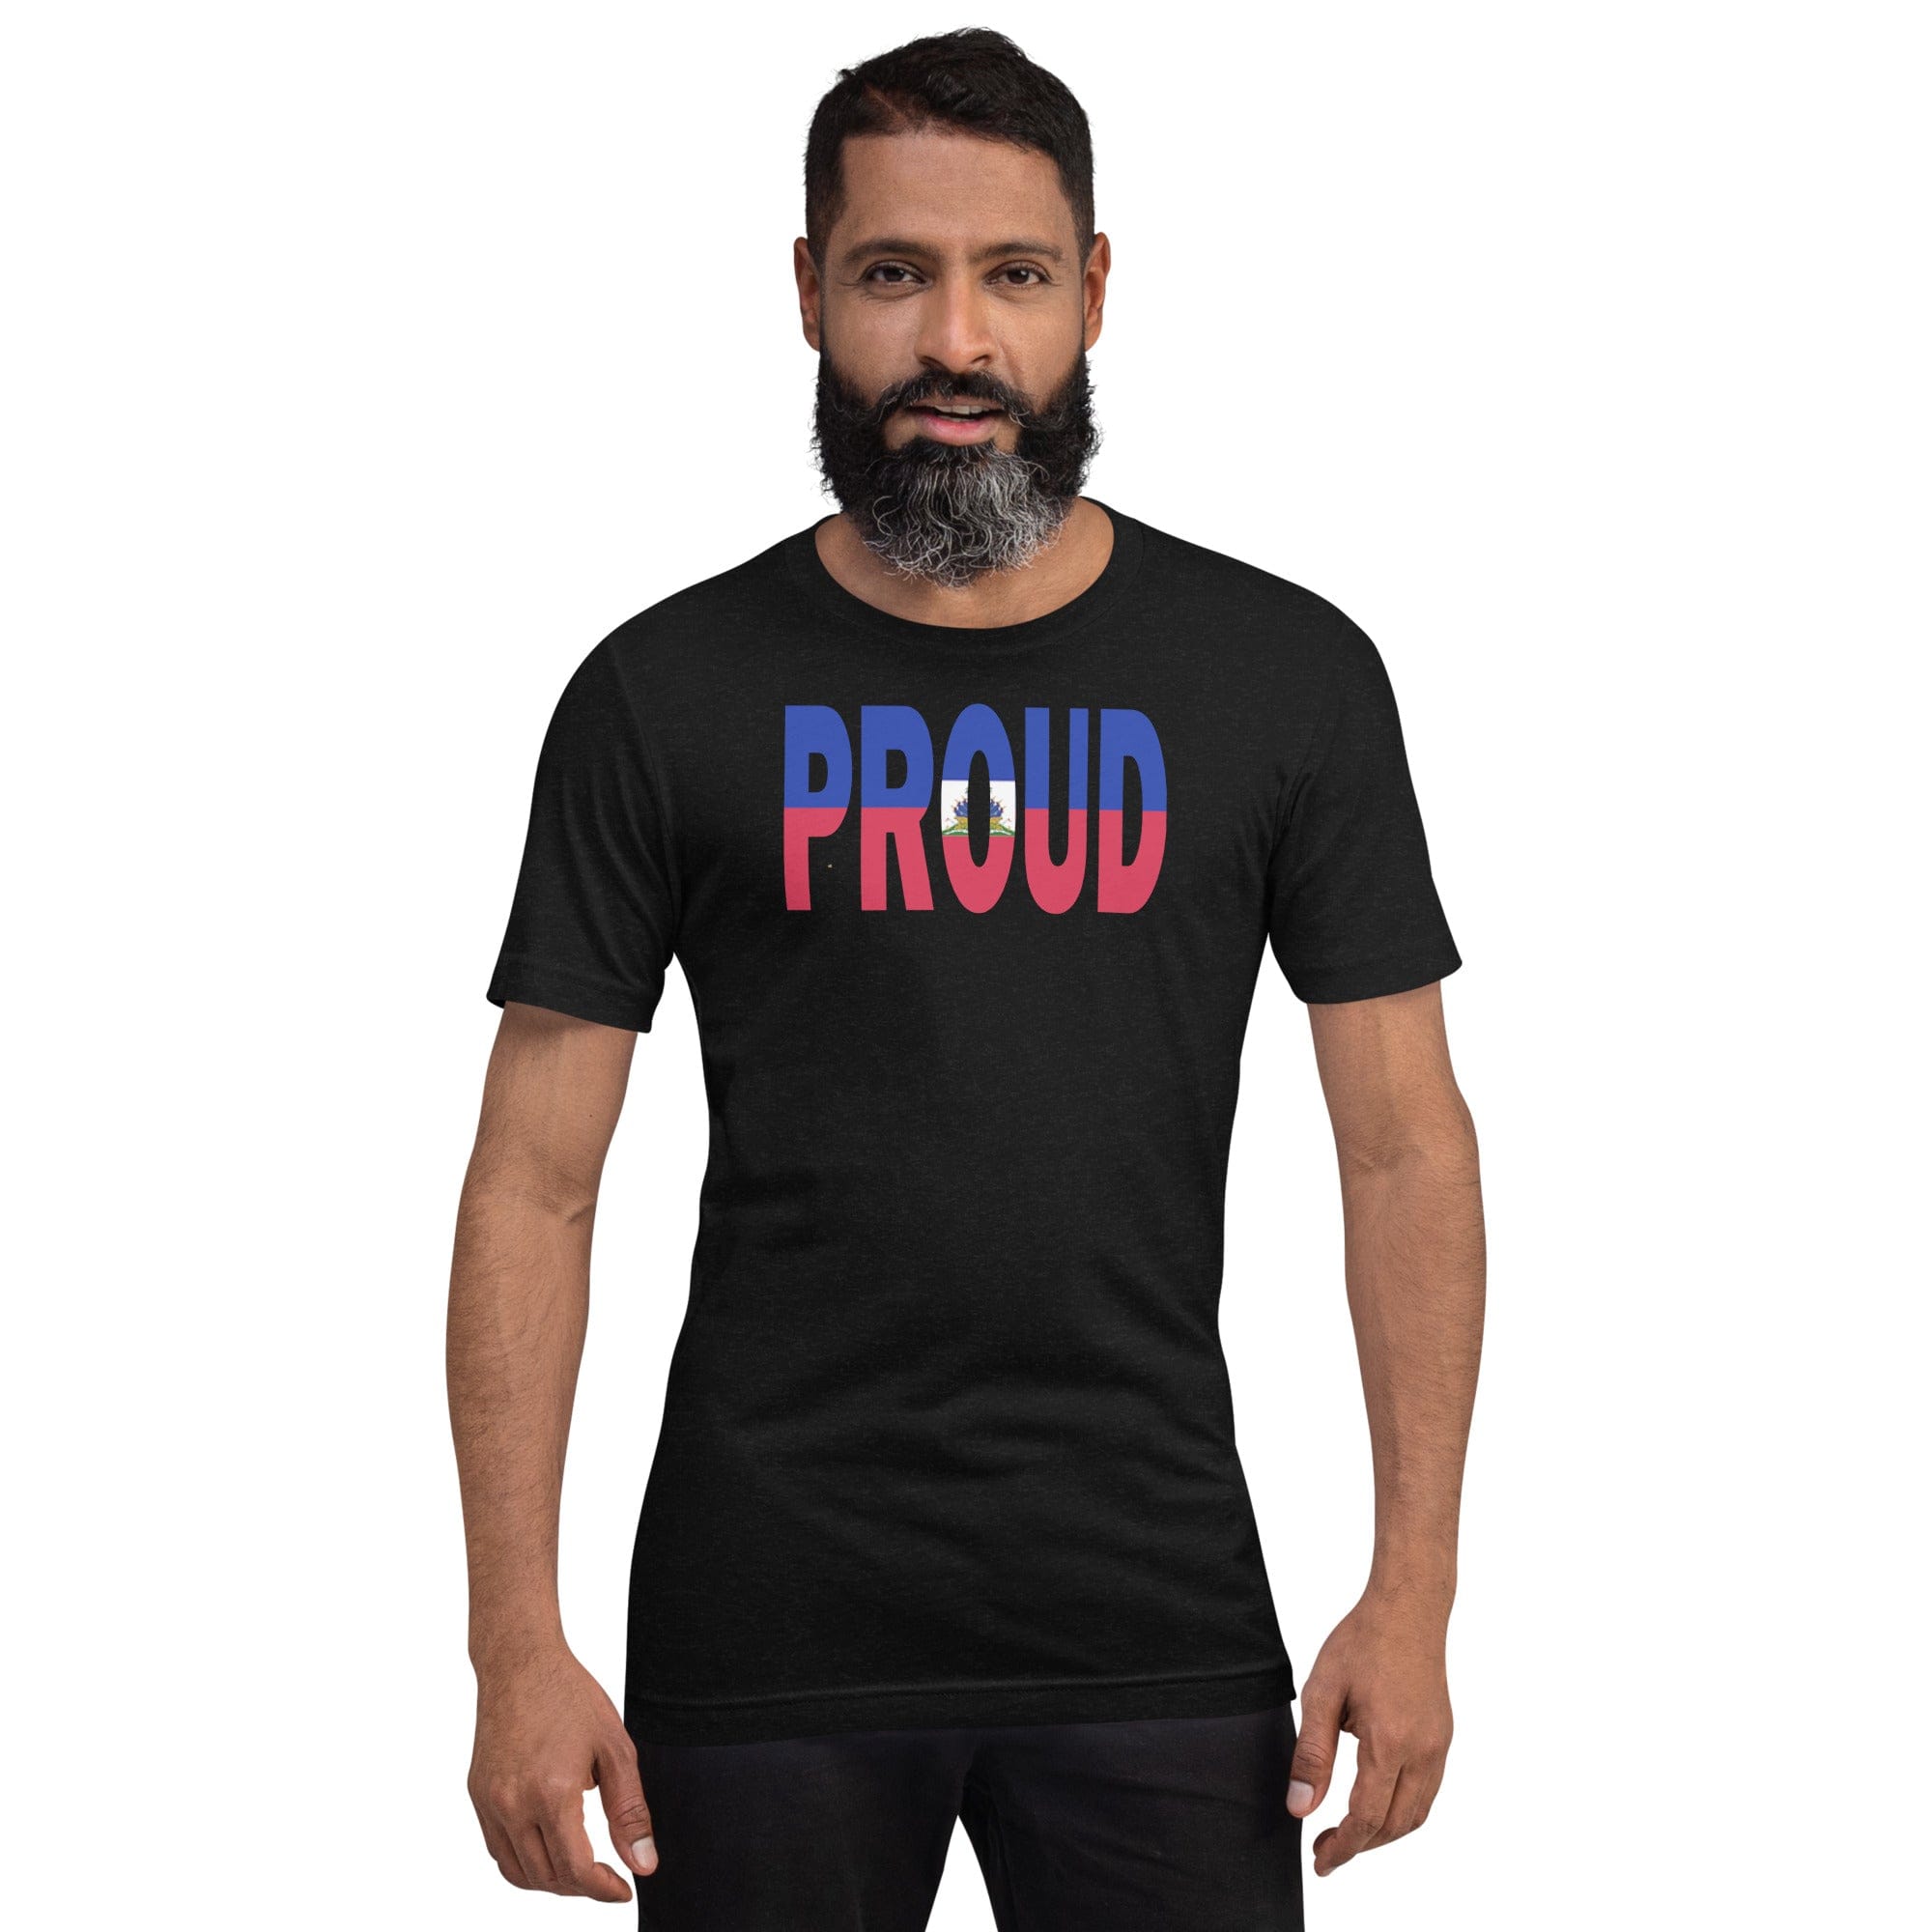 Haiti Flag designed to spell Proud on a black color t-shirt worn by a black man.